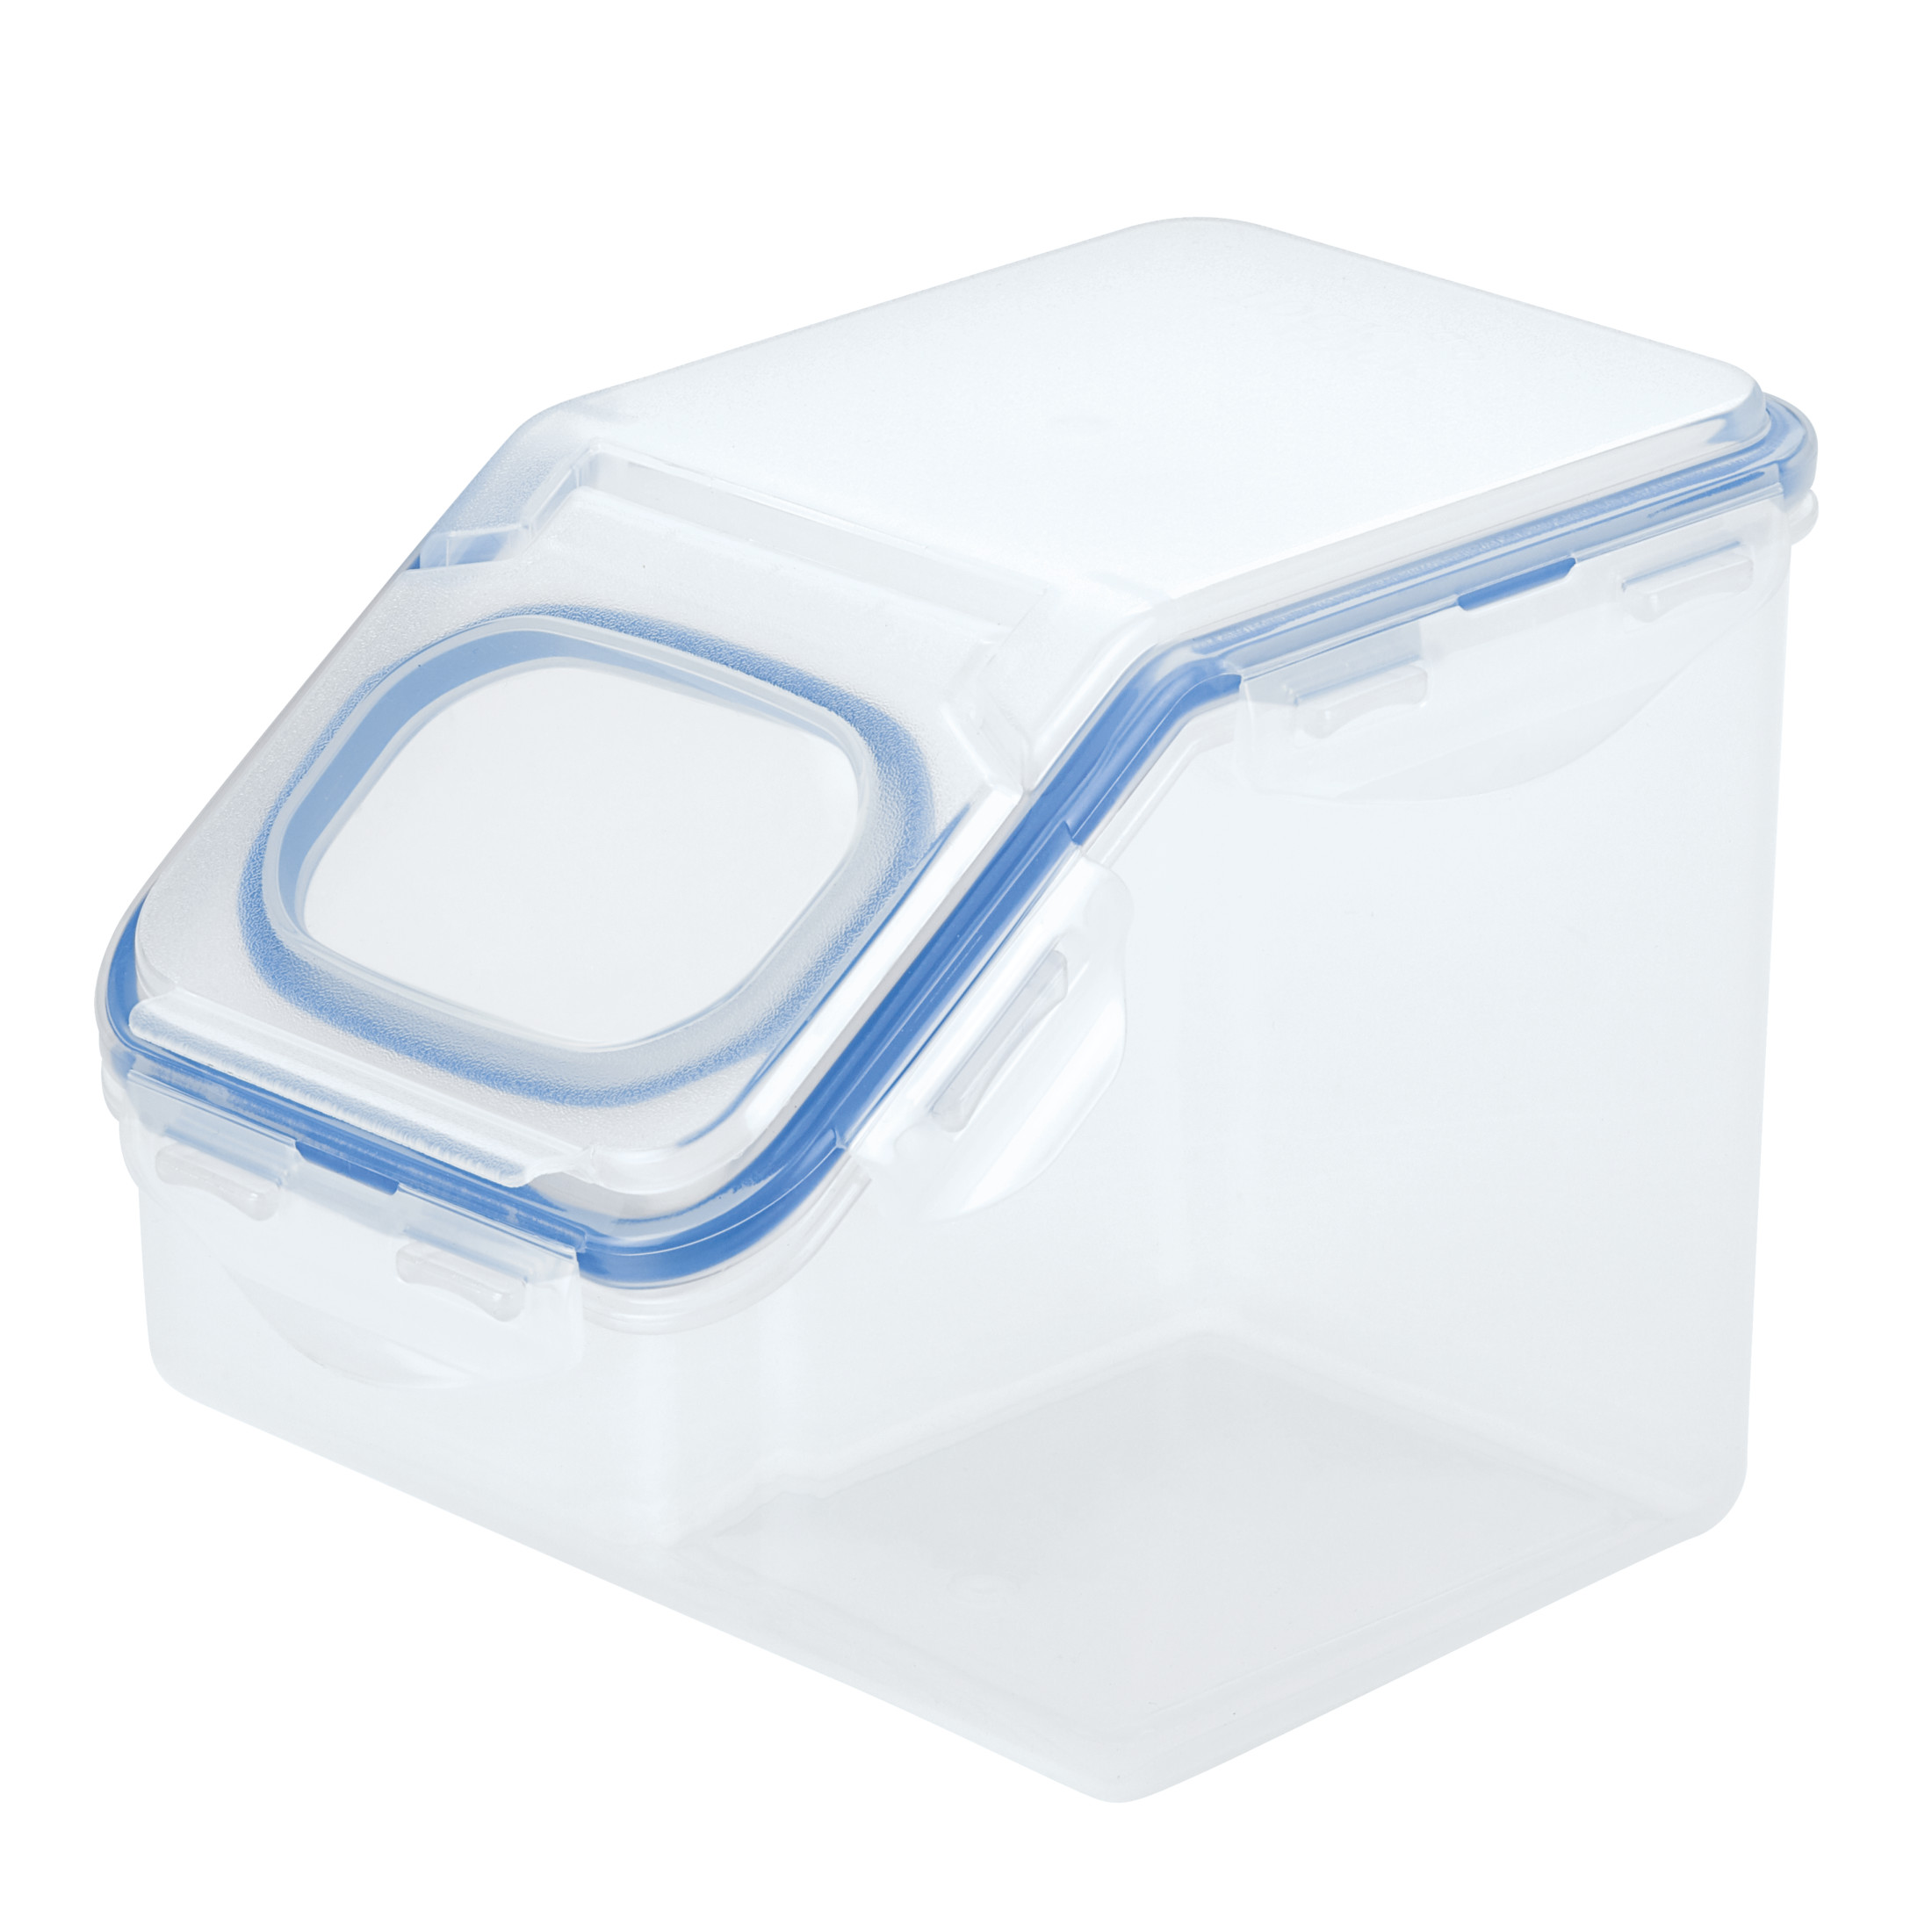 LocknLock Pantry Food Storage Container with Flip Lid, 10.6-Cup - image 1 of 4